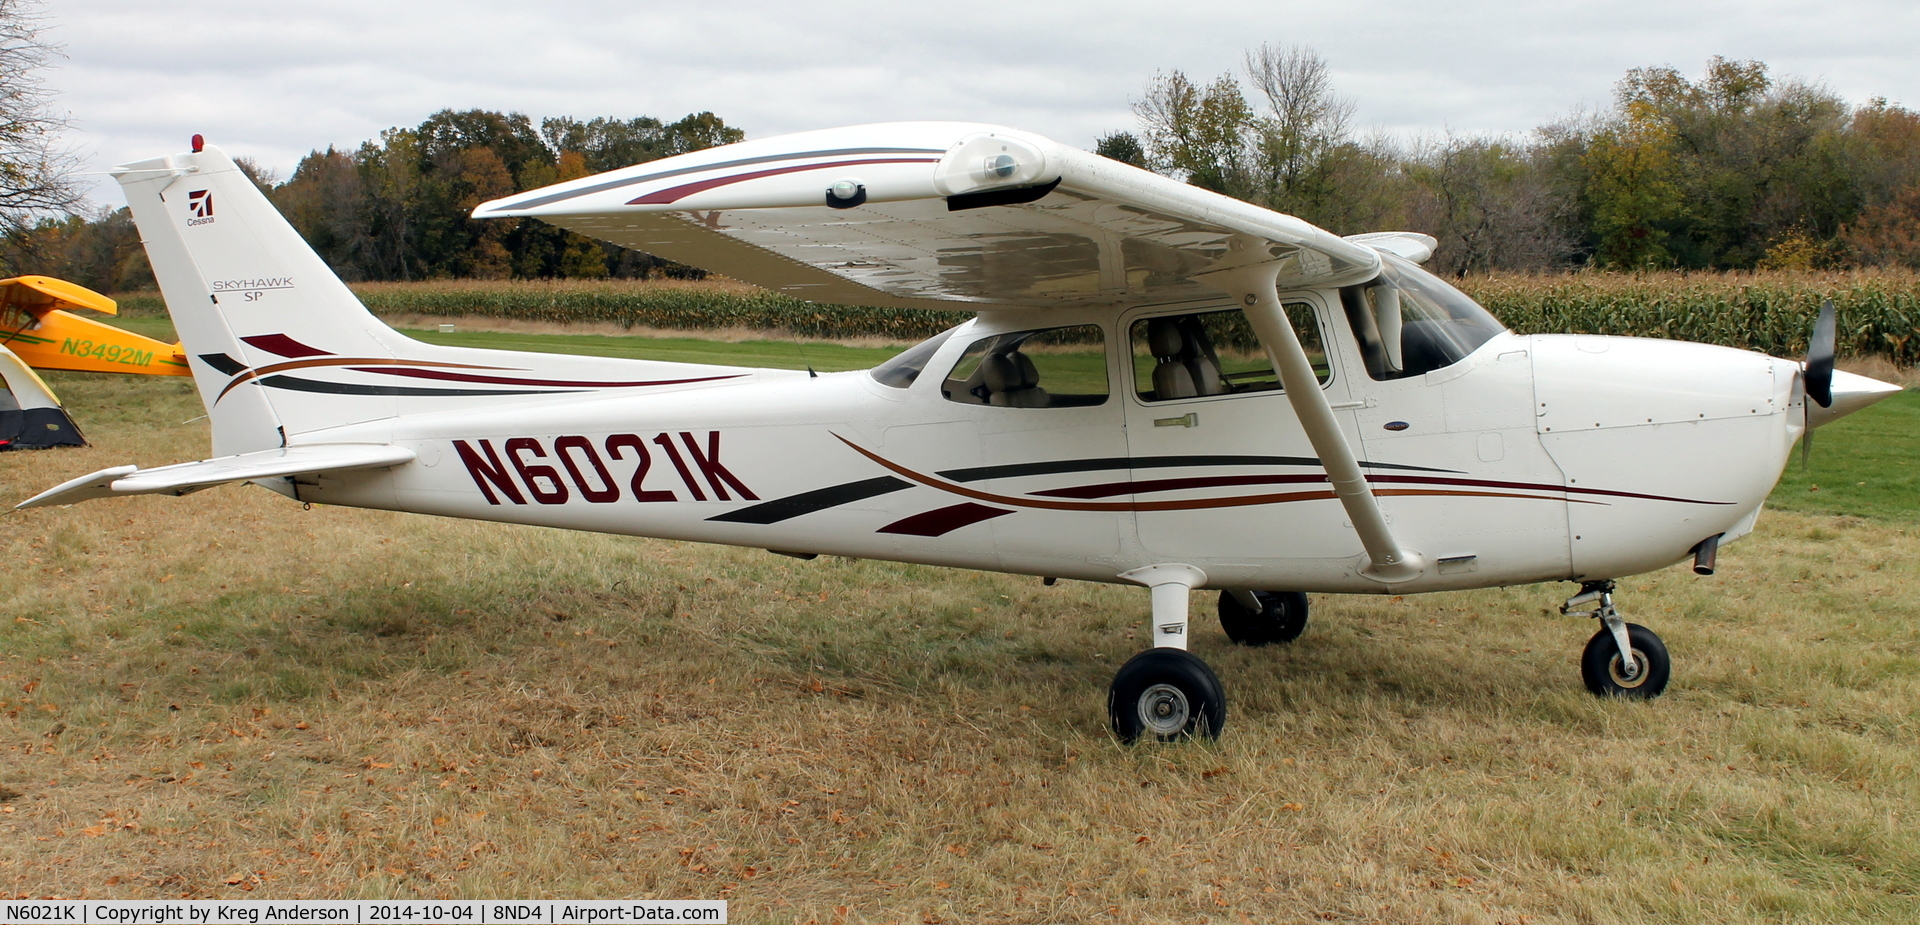 N6021K, 2006 Cessna 172S C/N 172S10181, 2014 EAA Chapter 1342 Fall Cook-Out, Camp-Out & Fly-in